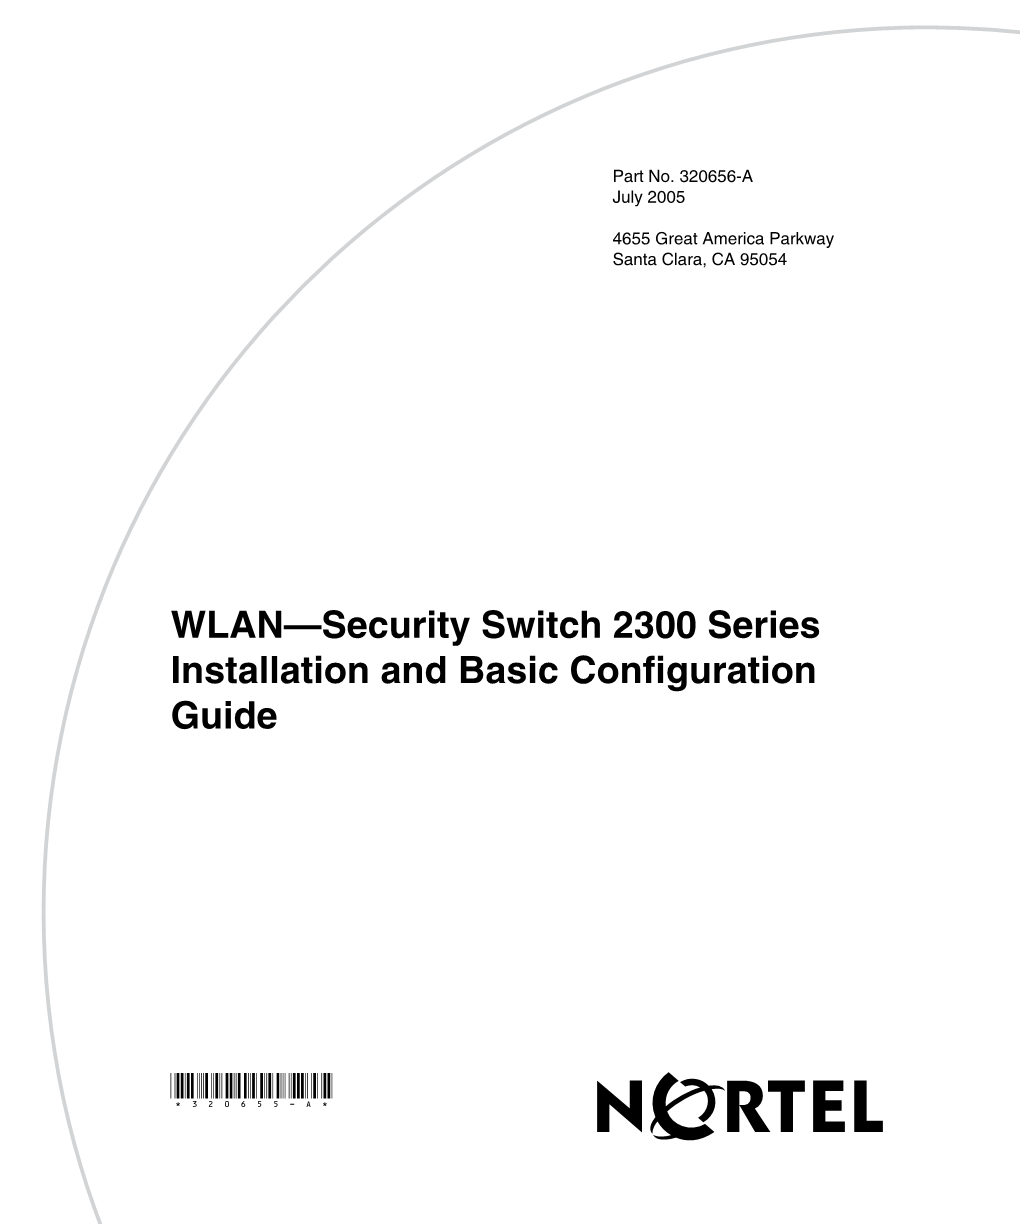 WLAN—Security Switch 2300 Series Installation and Basic Configuration Guide